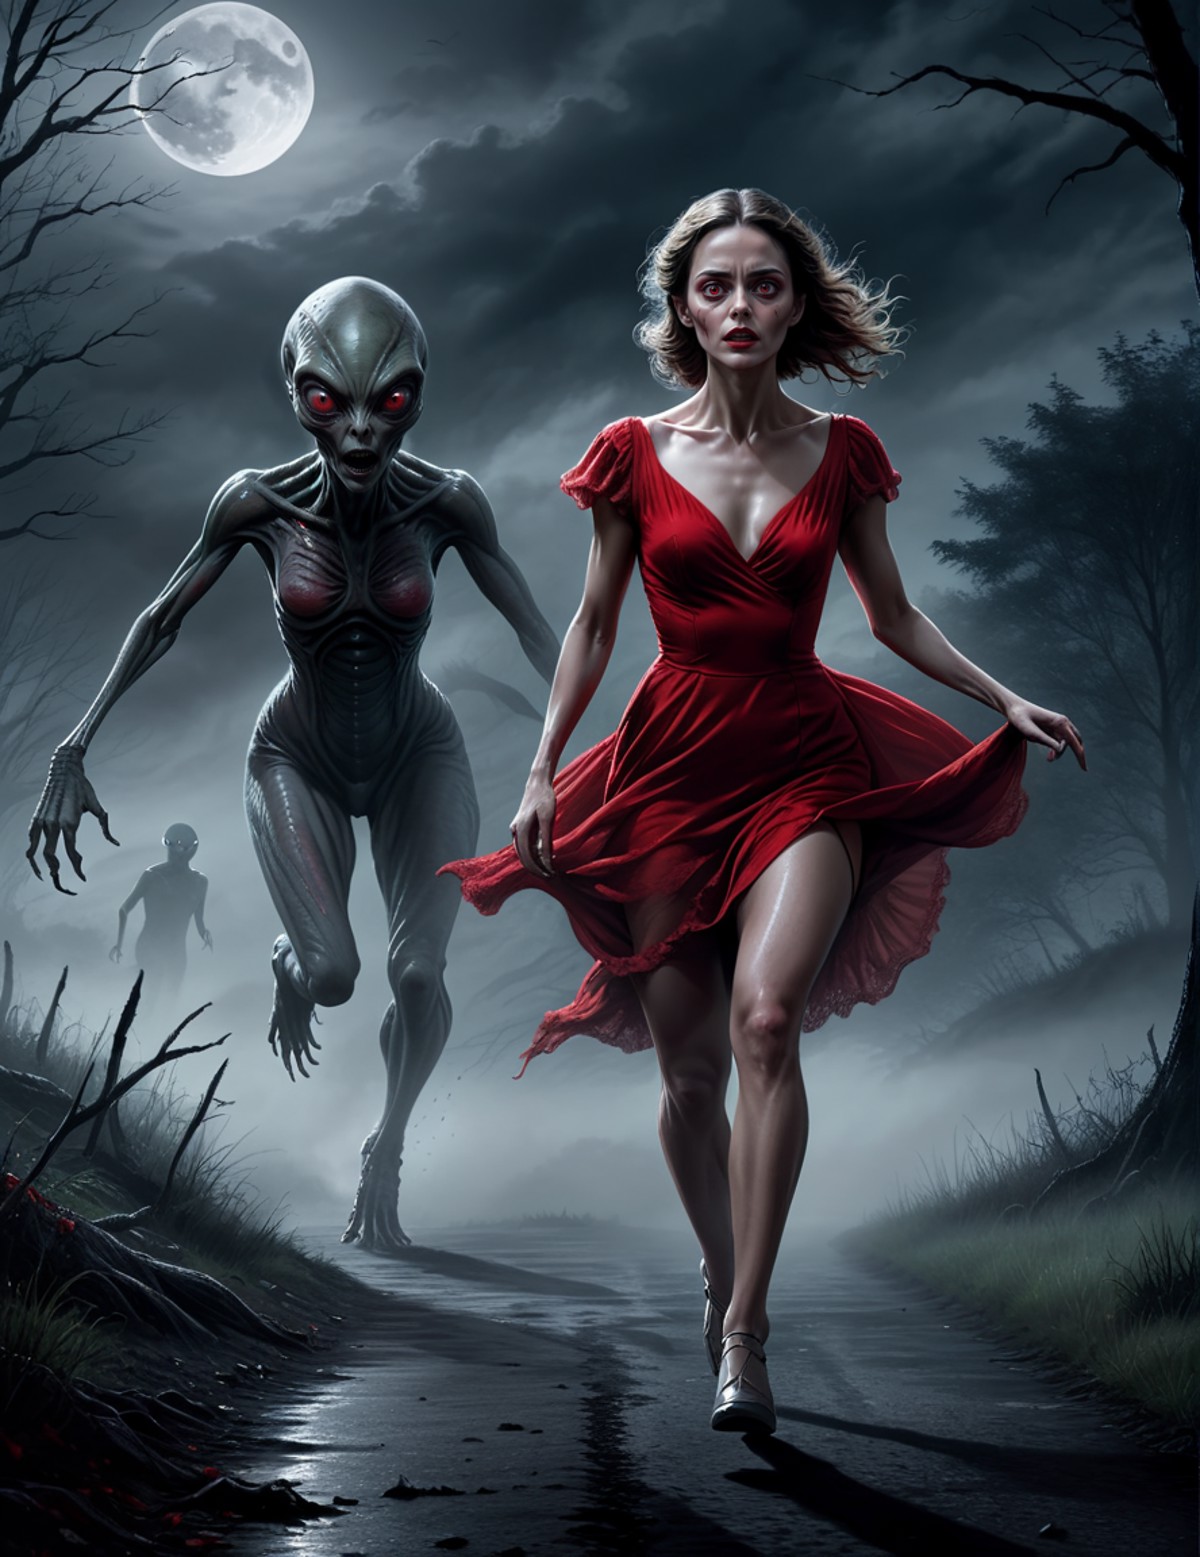 digital drawing, horror movie scene of a beautiful woman in a red dress being stalked in the dark by an alien, spooky, ter...